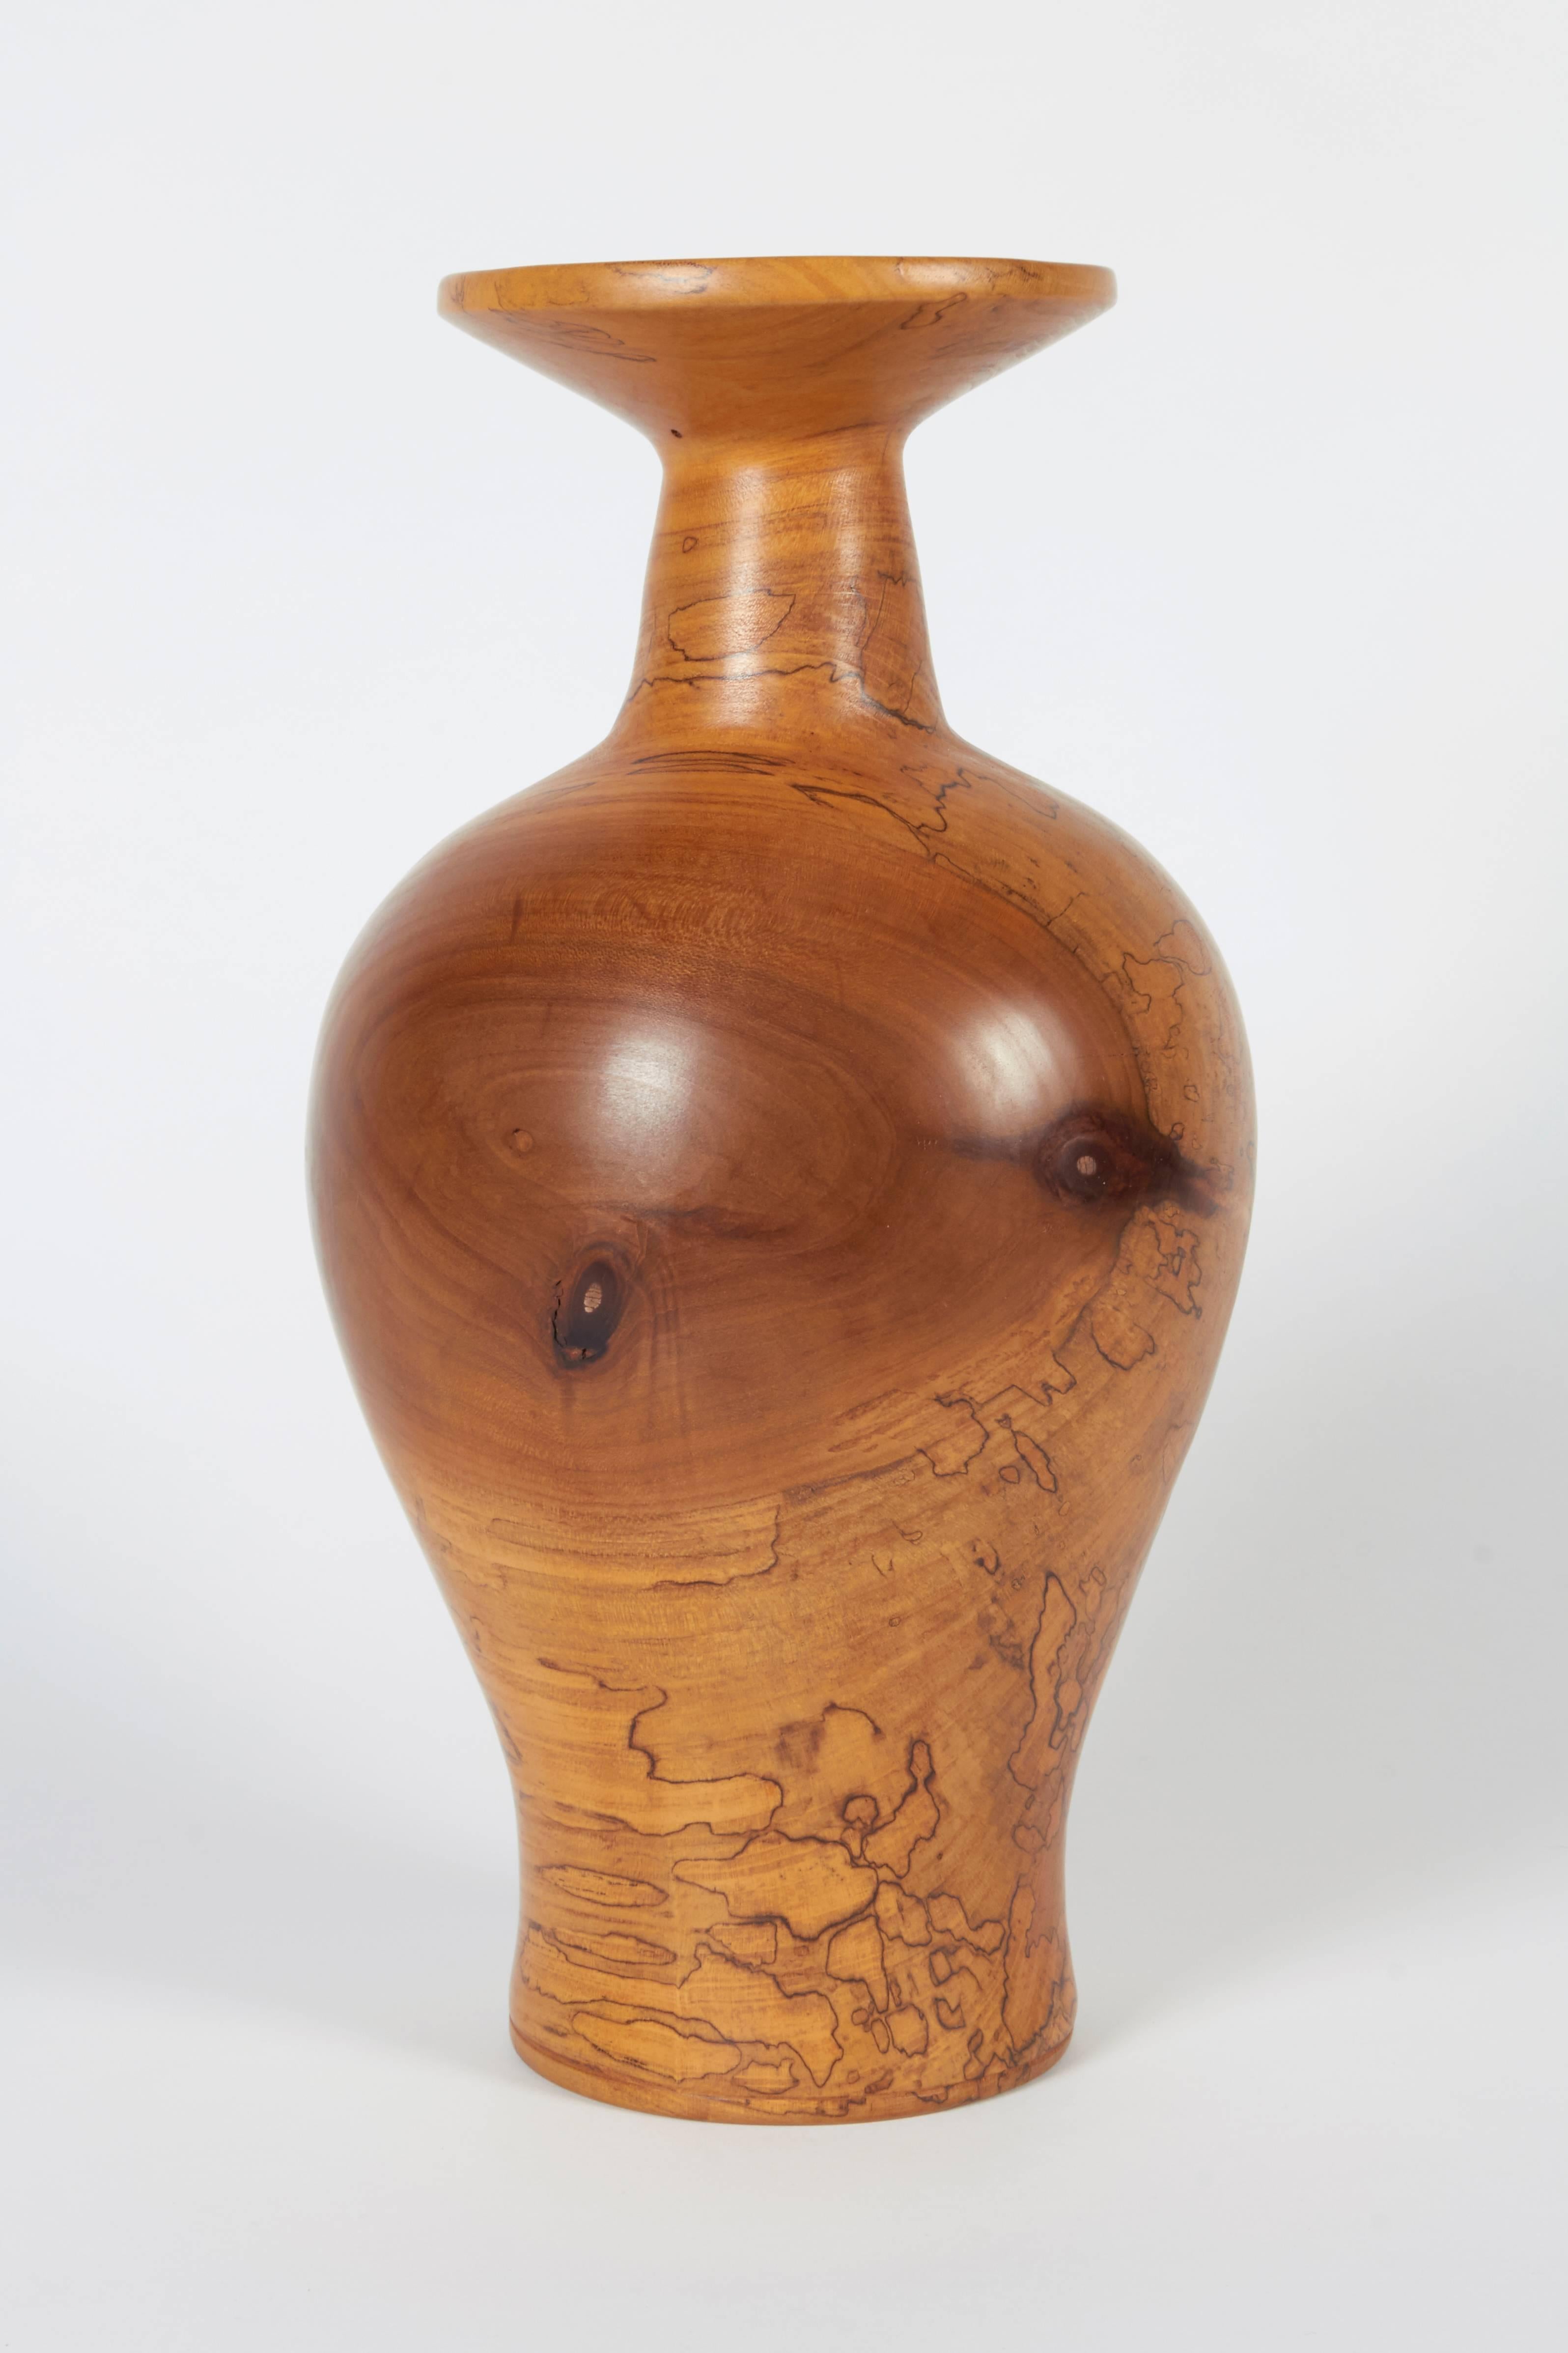 Melvin Lindquist began turning in the 1930s as a vertical turret lathe operator for the General Electric Company. In his shop at home, he began an exploration of the vase form through woodturning which has continued for over 50 years. He was one of